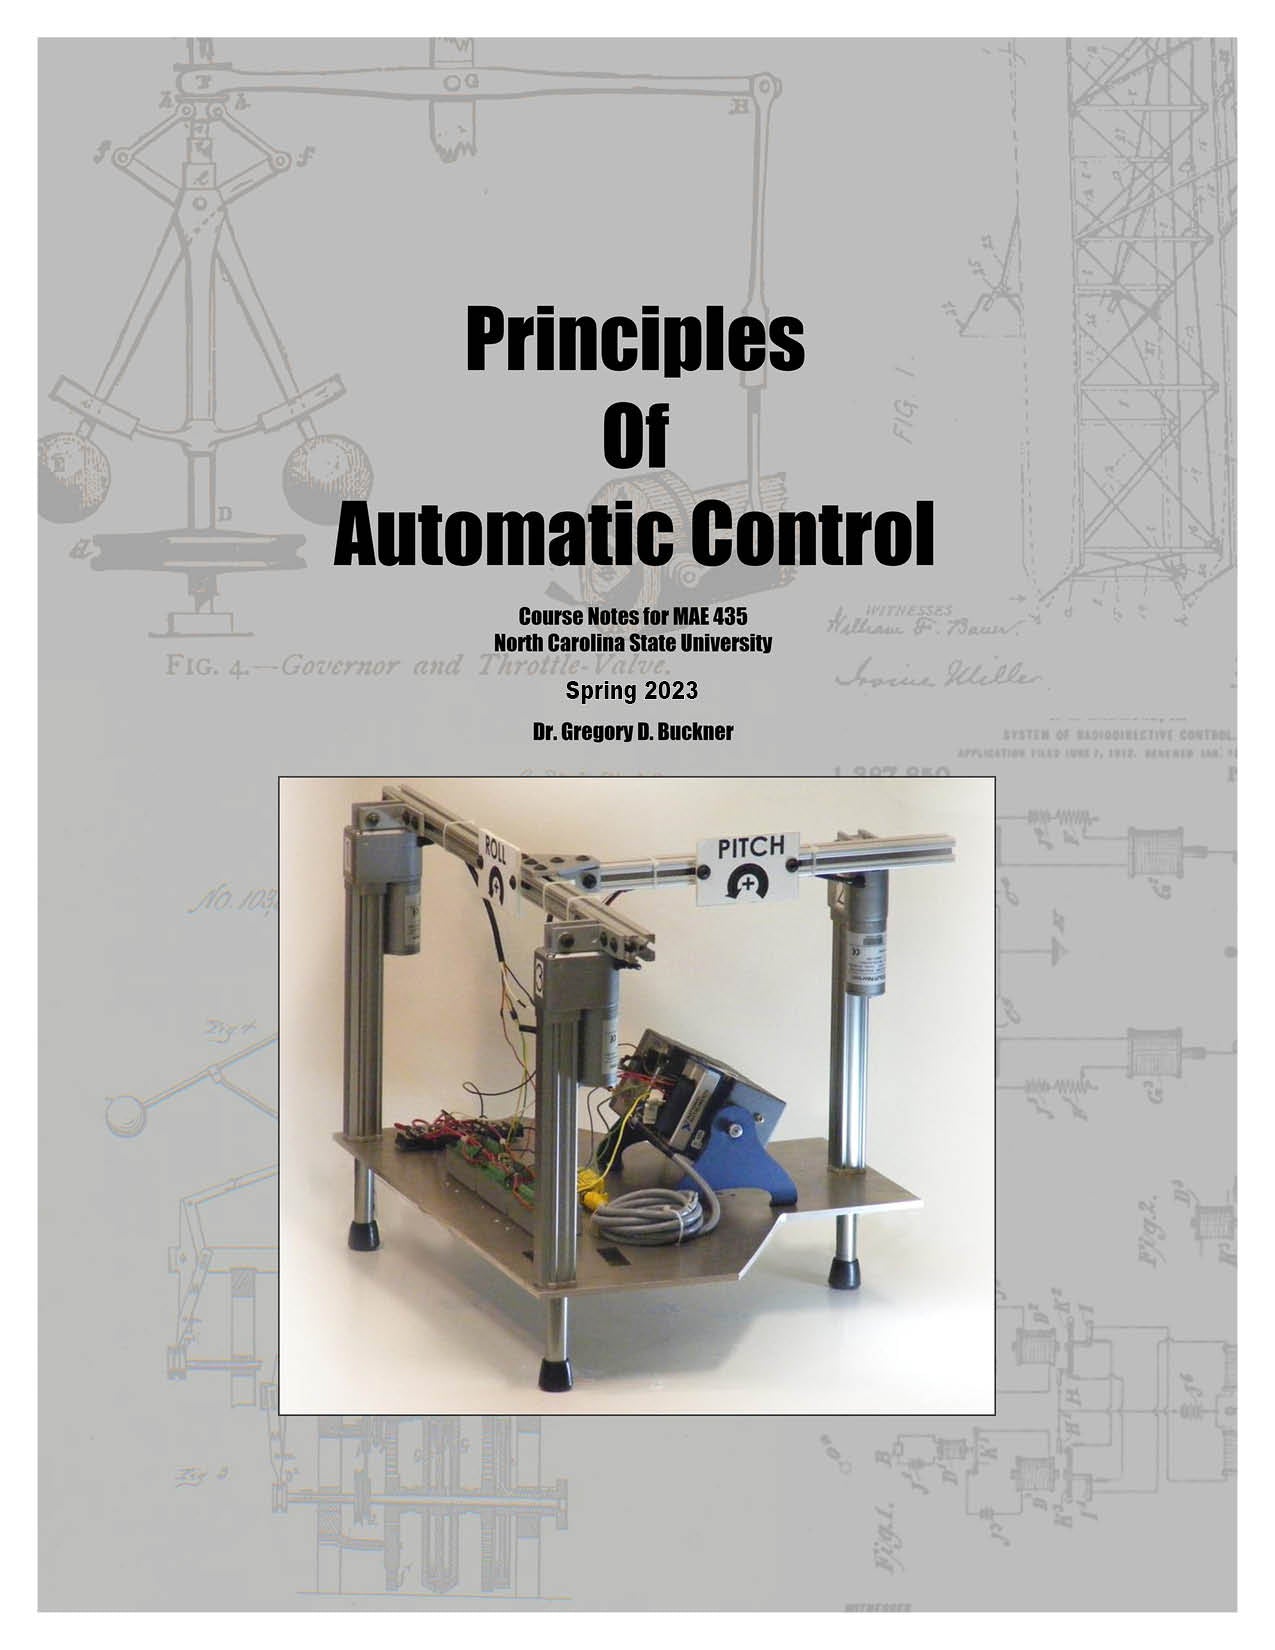 Principles of Automatic Control